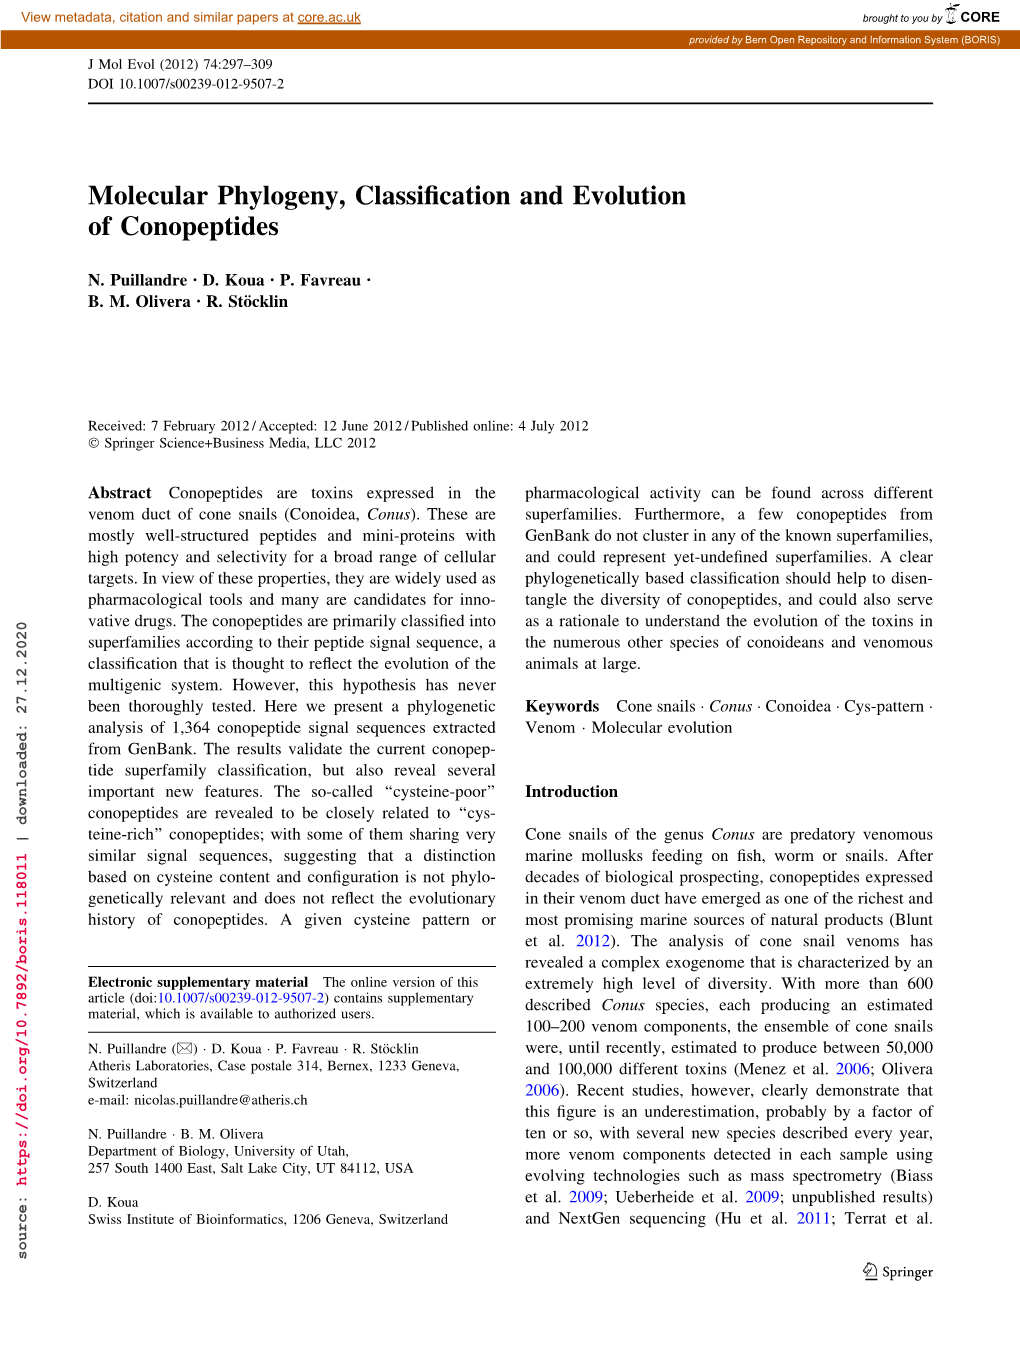 Molecular Phylogeny, Classification and Evolution of Conopeptides